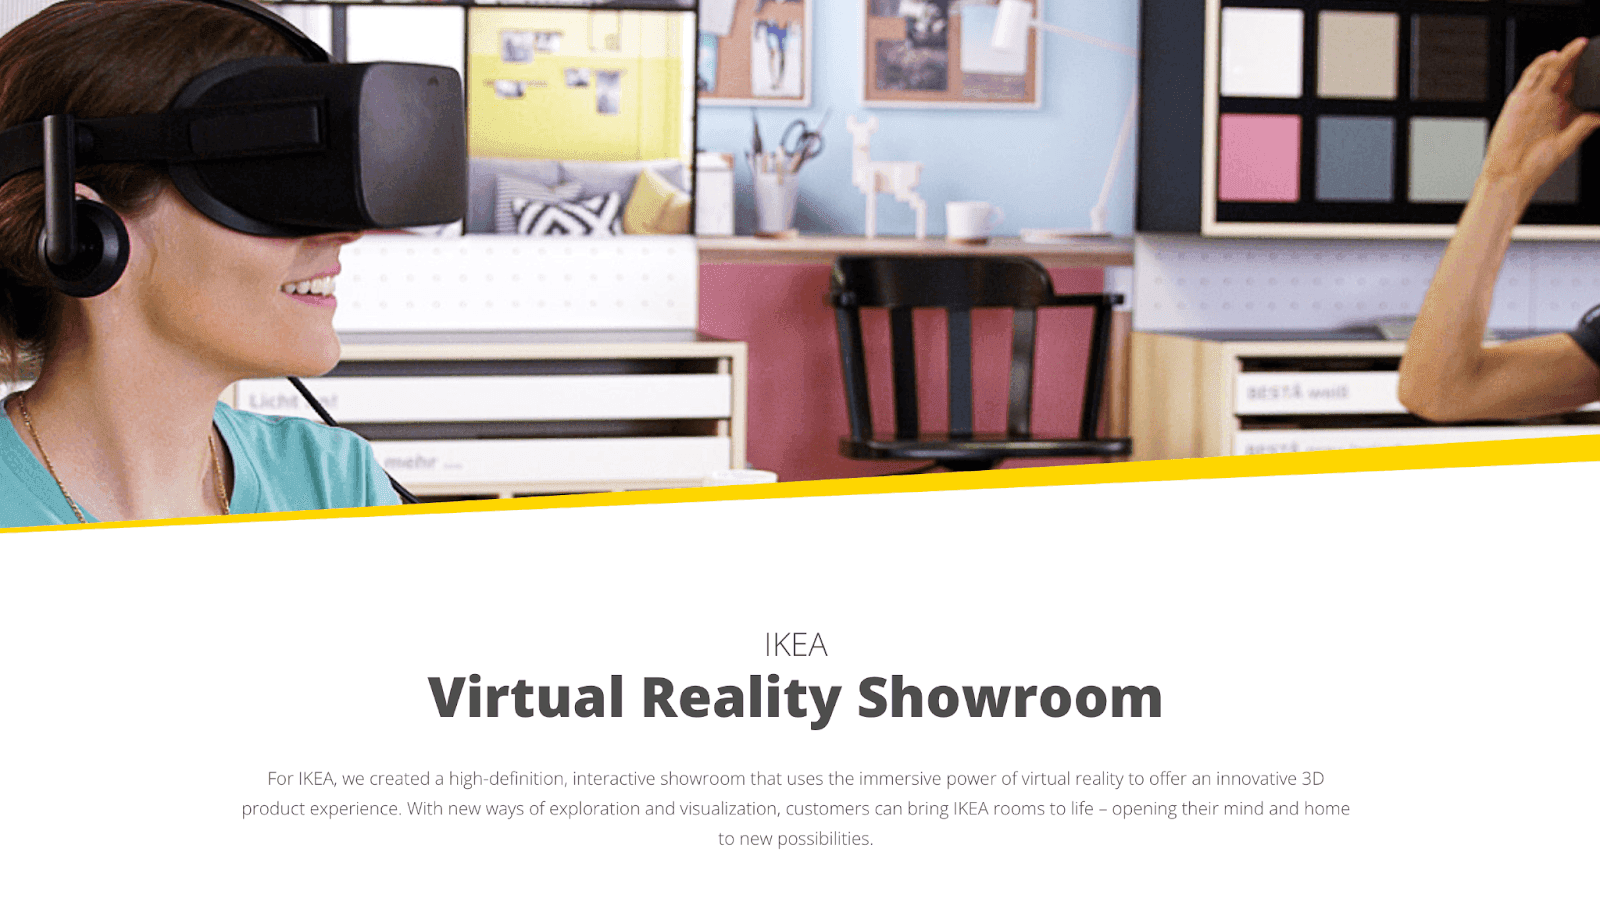 Ikea Virtual Reality Showroom website with picture of person using VR